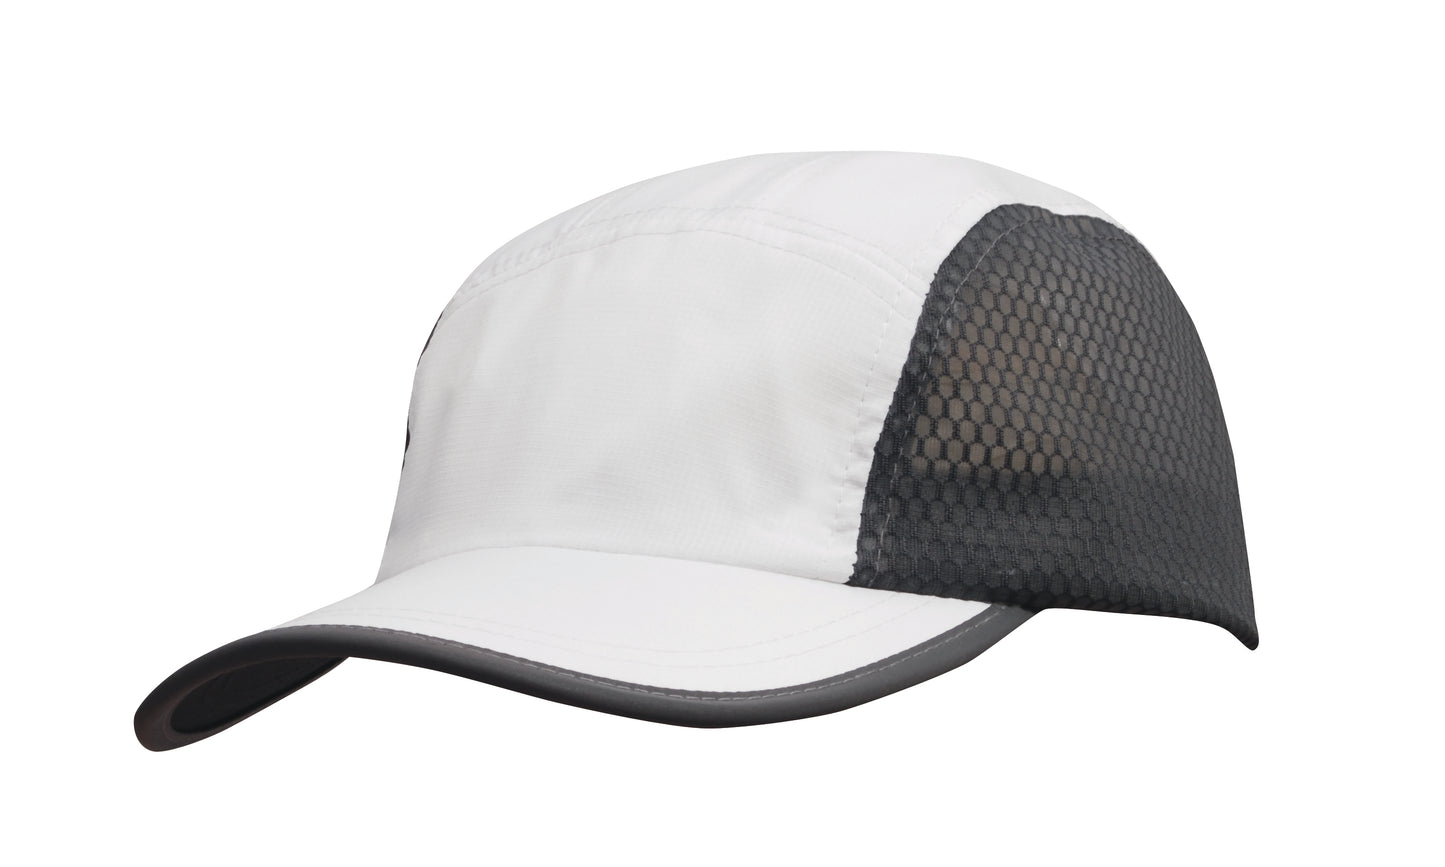 Headwear Sports Ripstop with Bee Hive Mesh and Towelling Sweatband (4003)